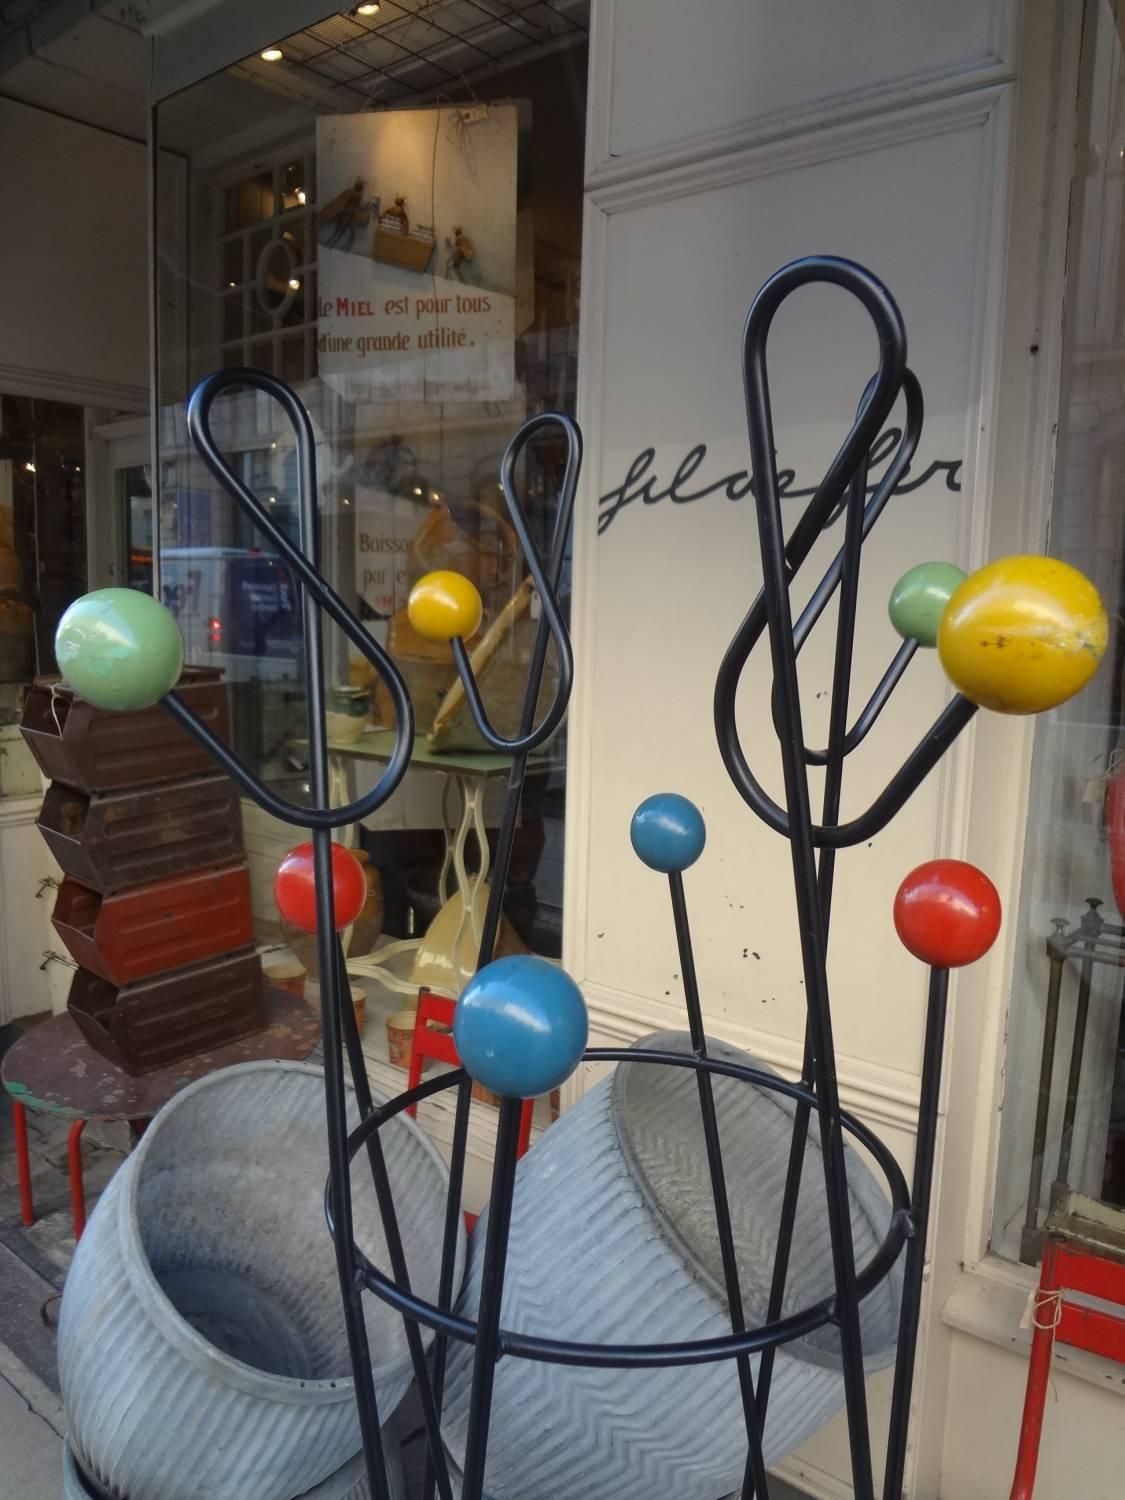 Fabulous vintage coat stand from the 1950s, designed by Roger Feraud. Made of cast iron painted black, with coloured wooden balls. Called ‘Clé de Sol’ (Sun Key) or Perroquet (Parrot). Fantastic cool piece. Great patina.